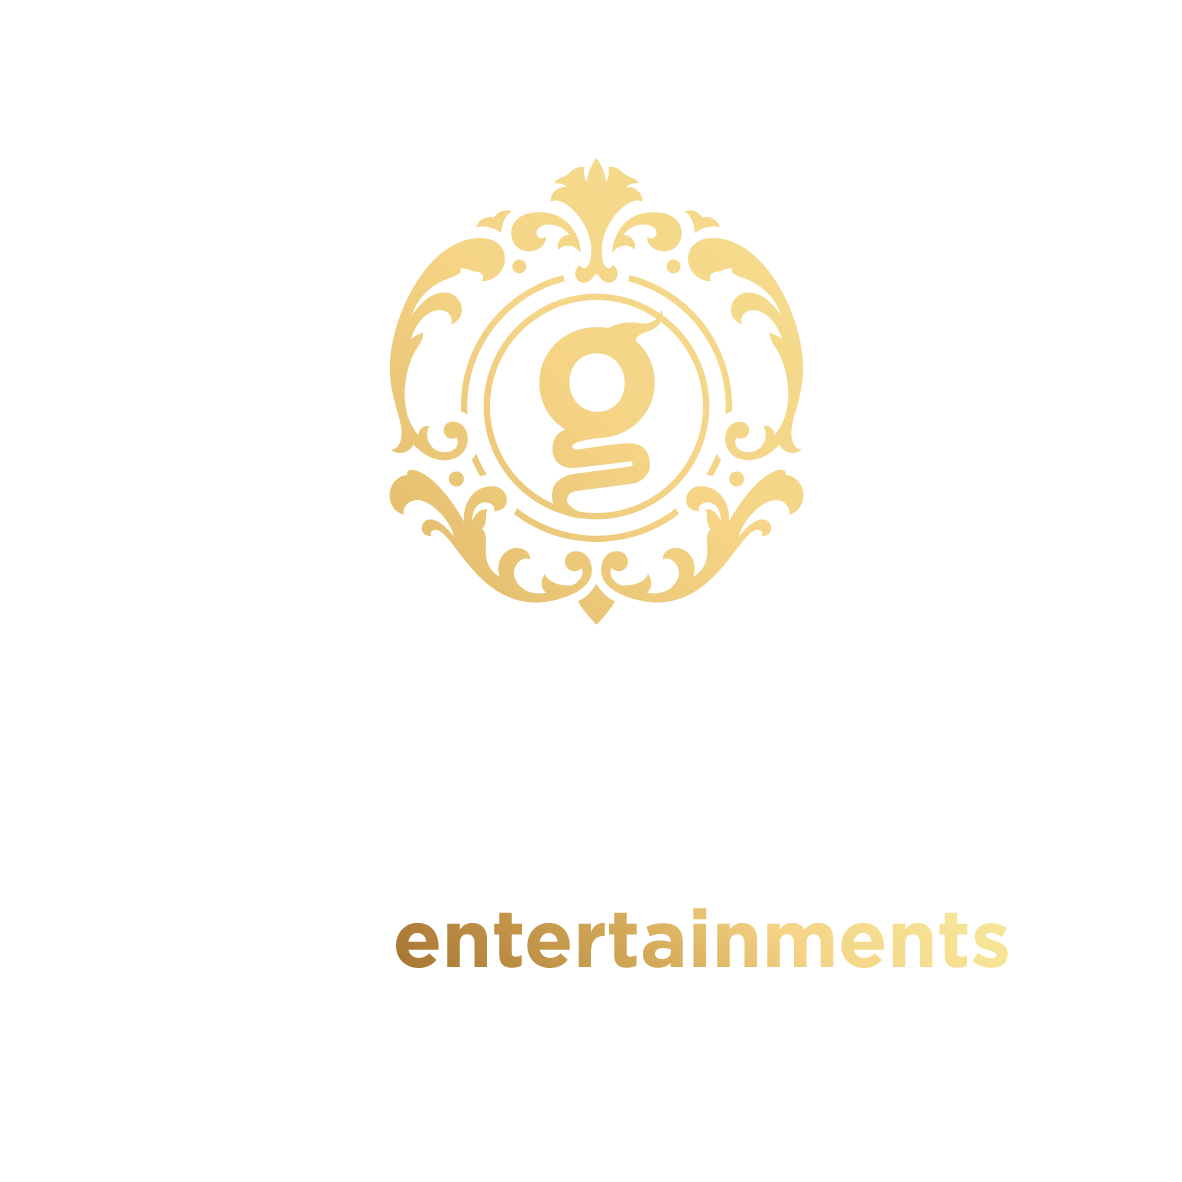 Ghost Entertainments for Weddings & Special Occasions